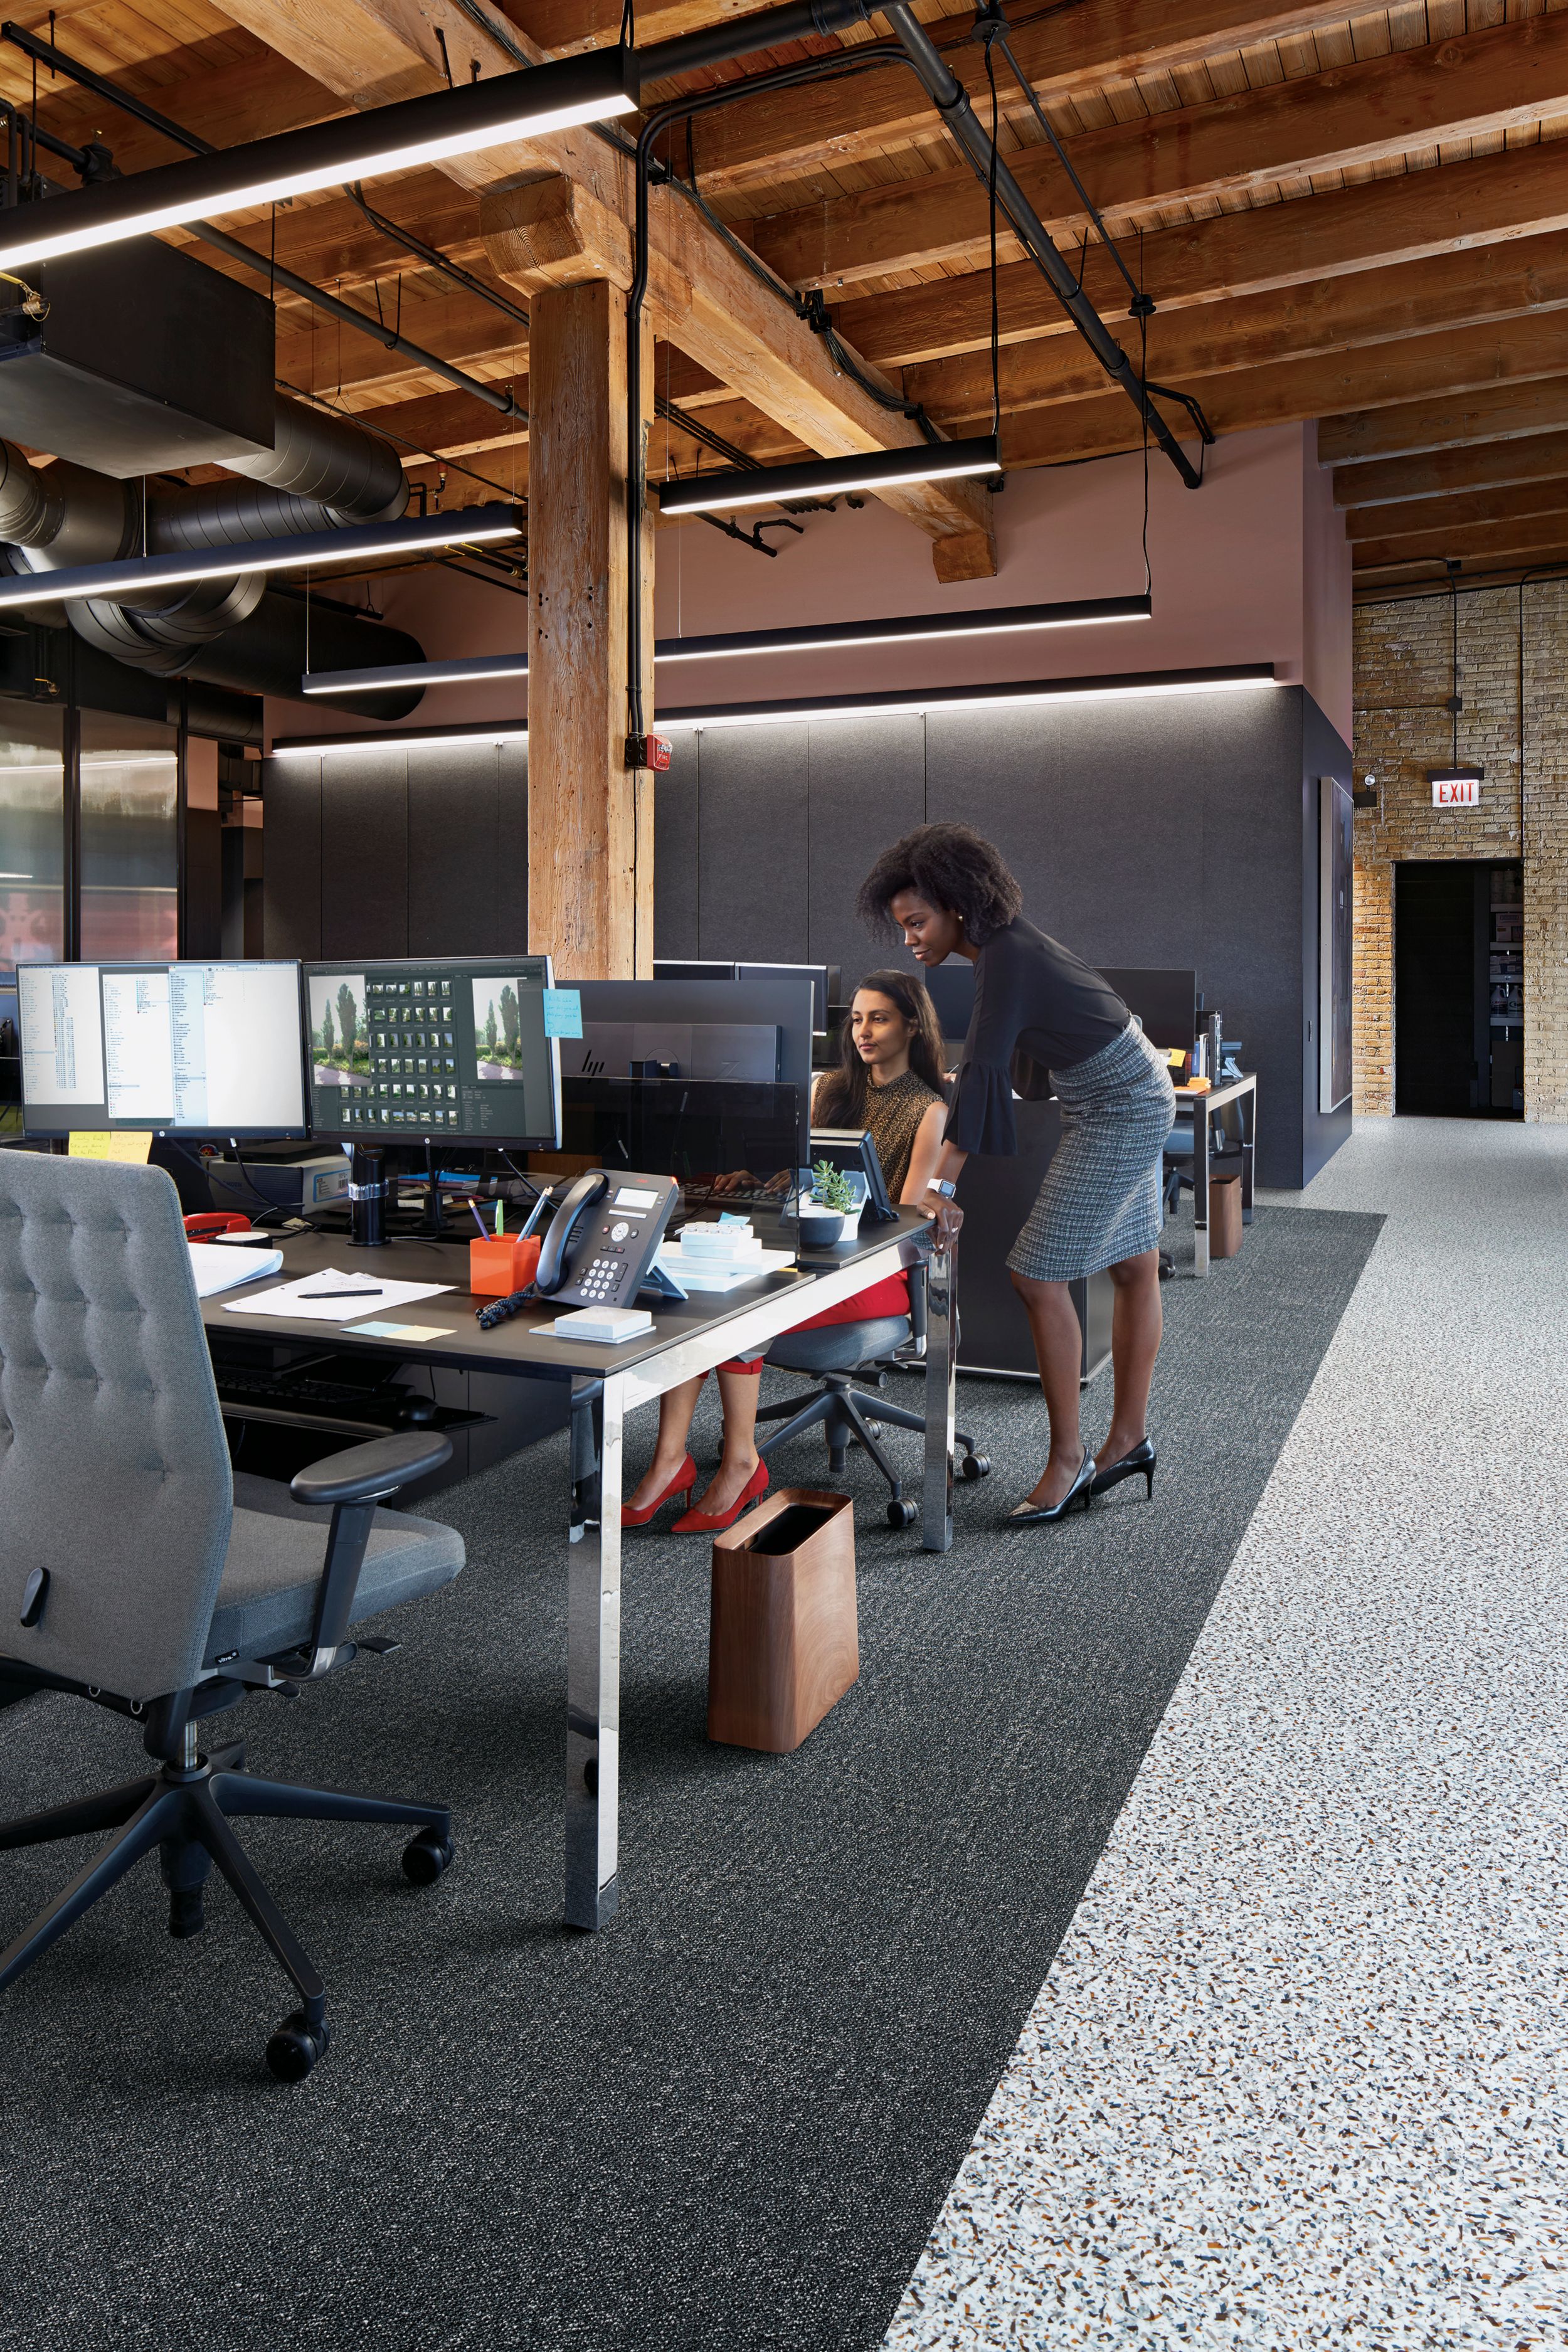 Interface Step it Up and Walk on By carpet tile in common work space with two people número de imagen 8